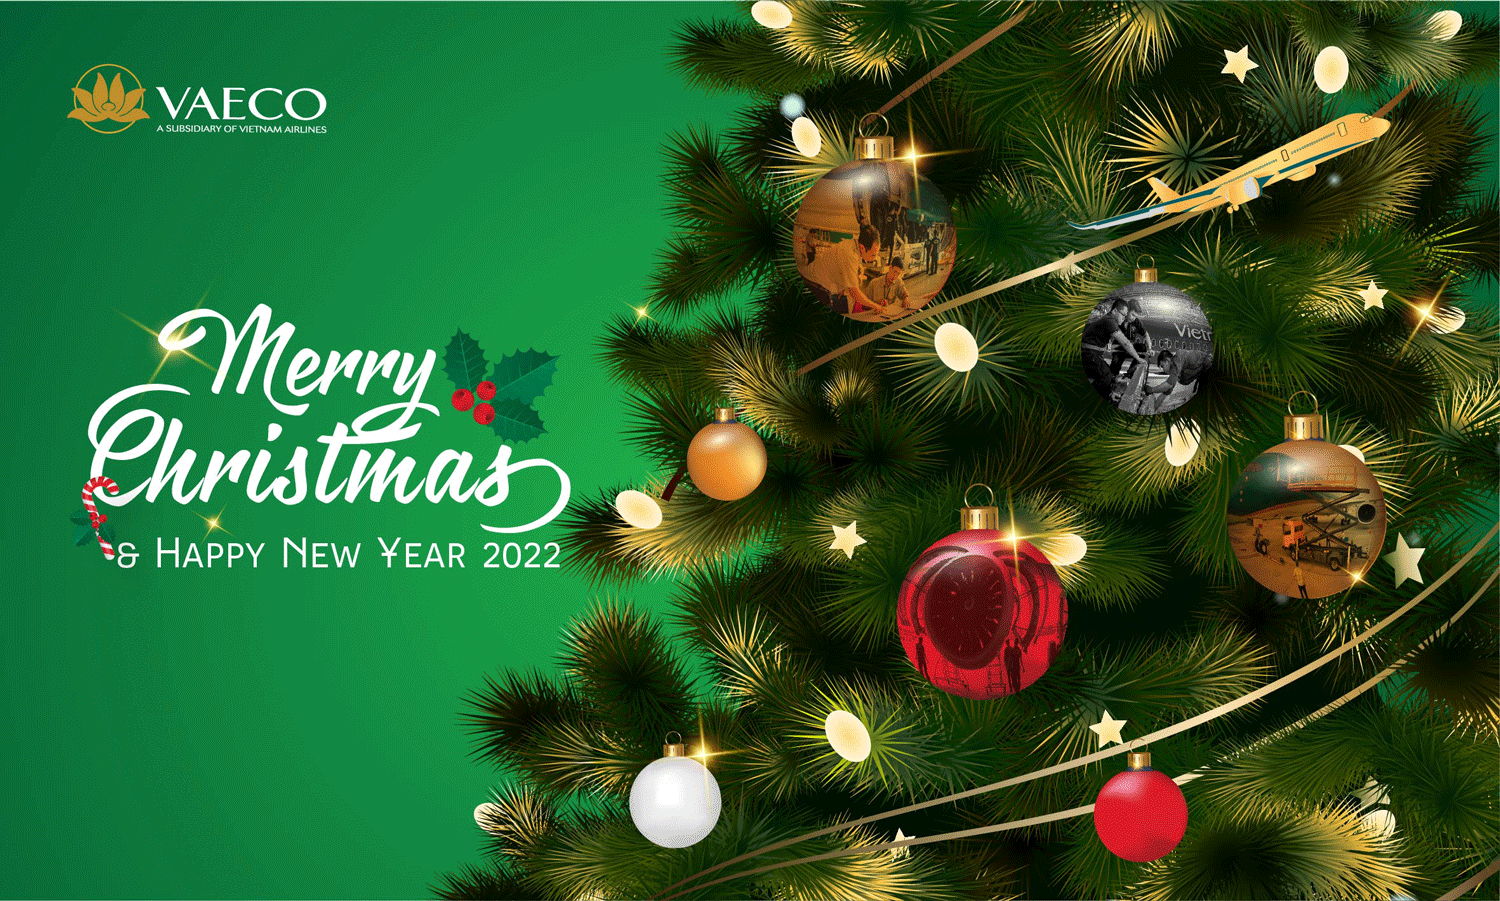 We wish you a Merry Christmas and Happy New Year 2022